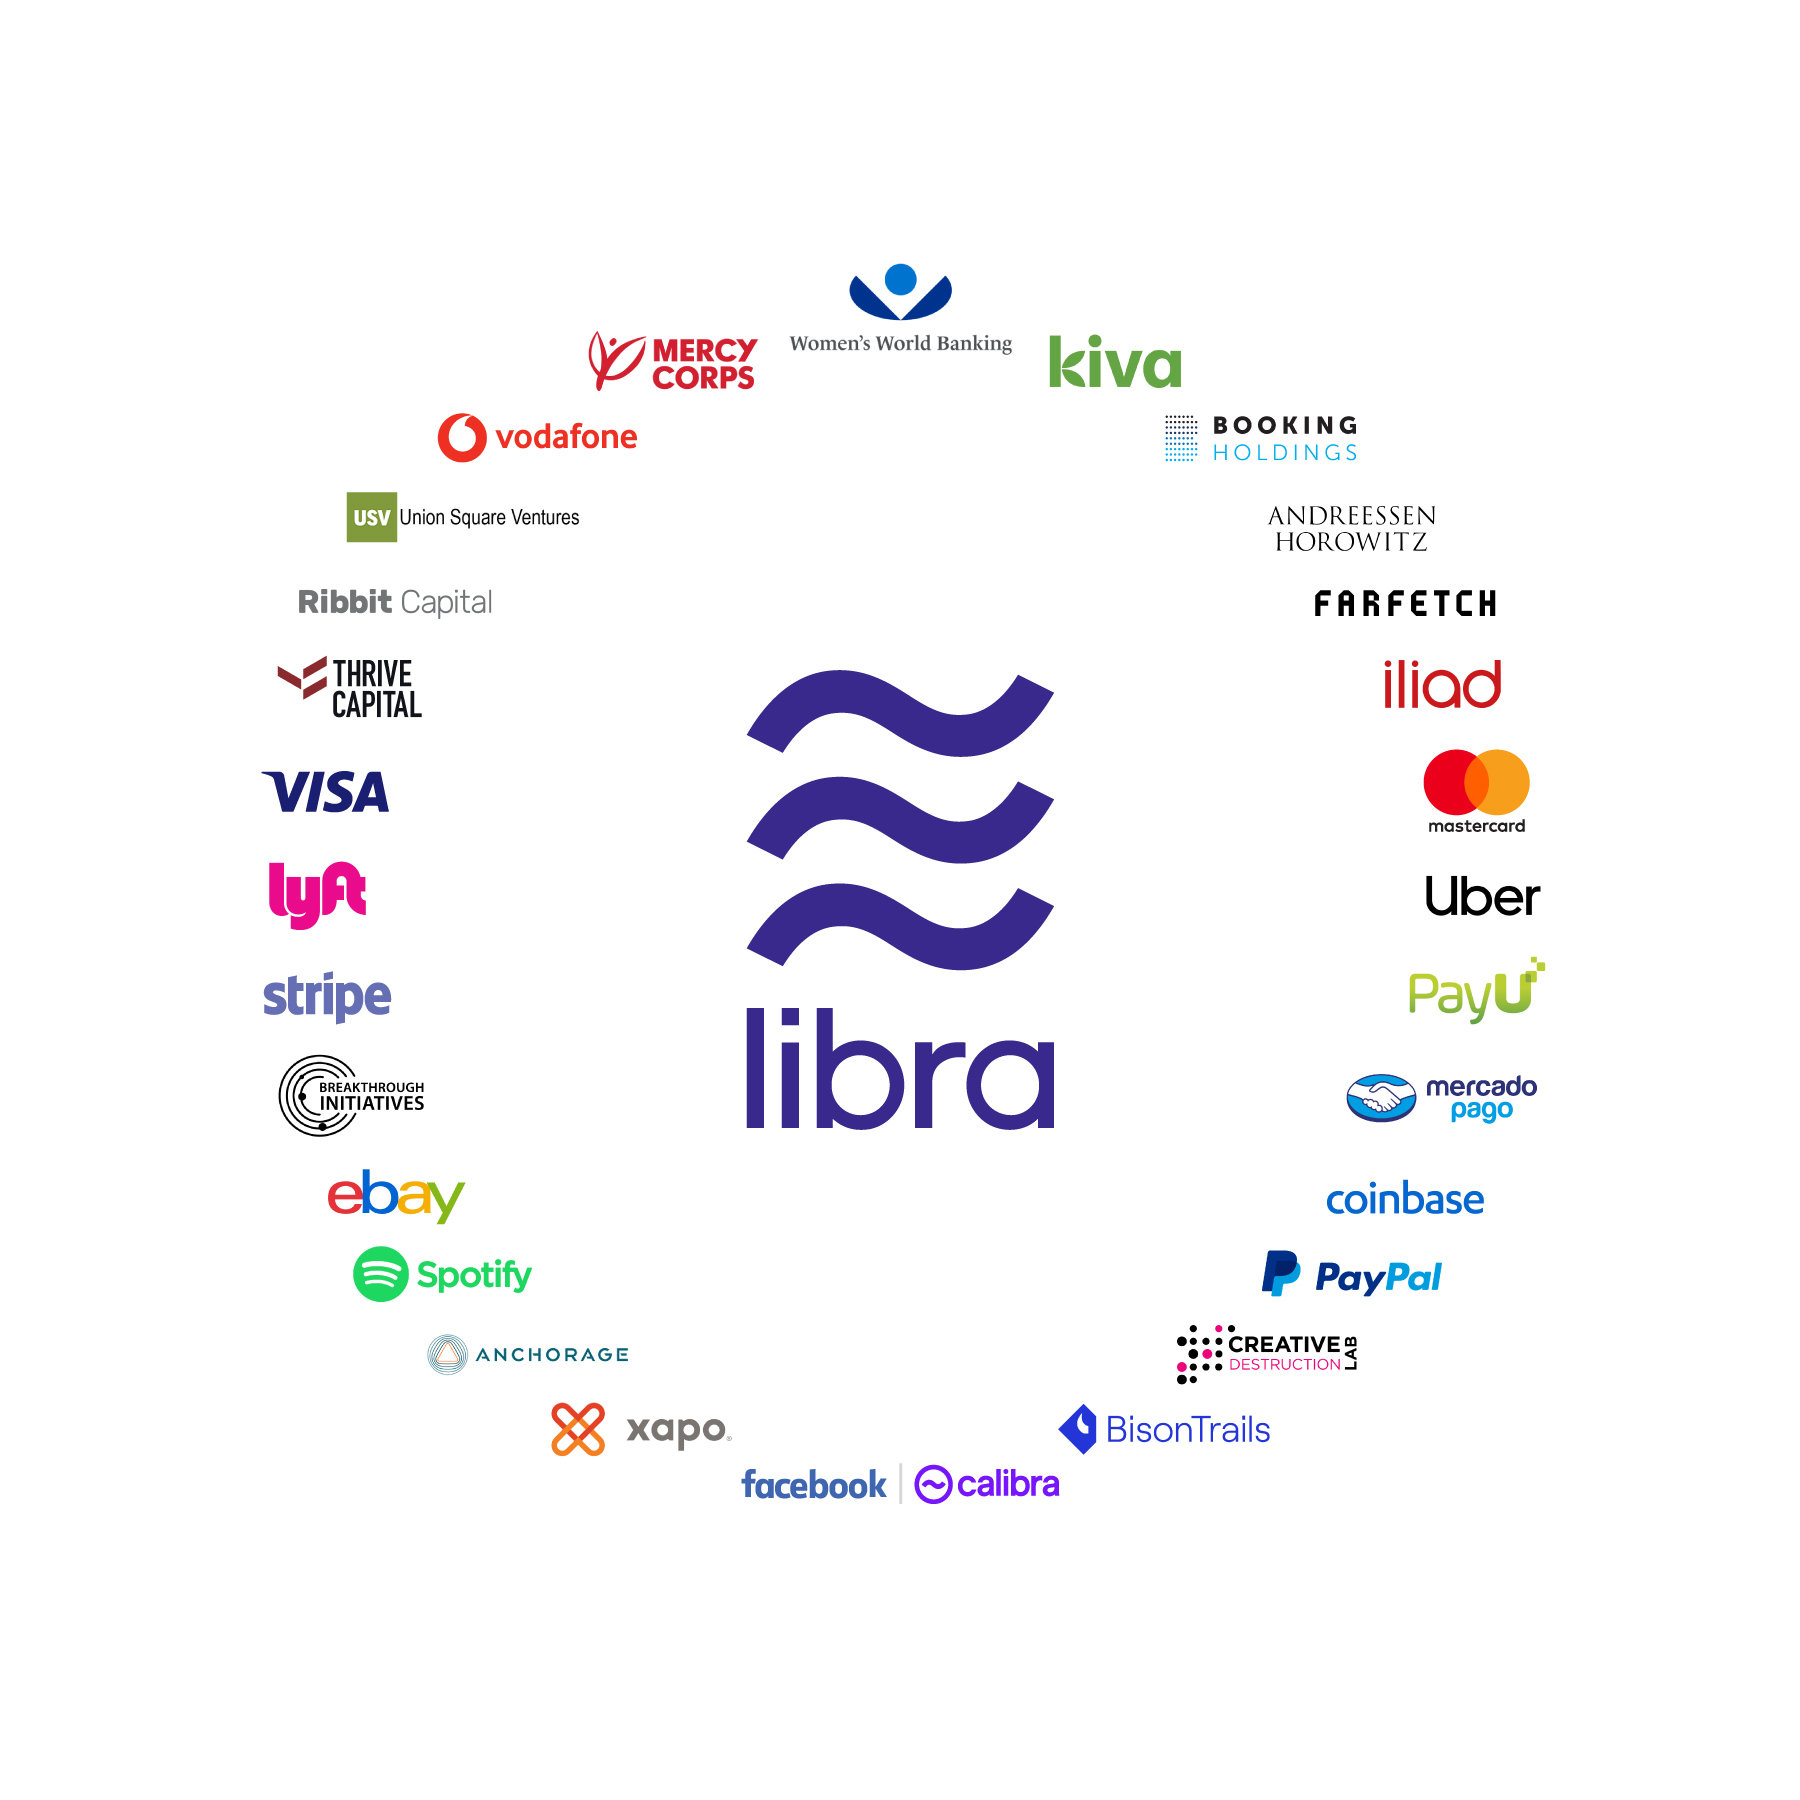 Perspectives on Libra, Facebook’s Proposed Cryptocurrency | Calamos Investments